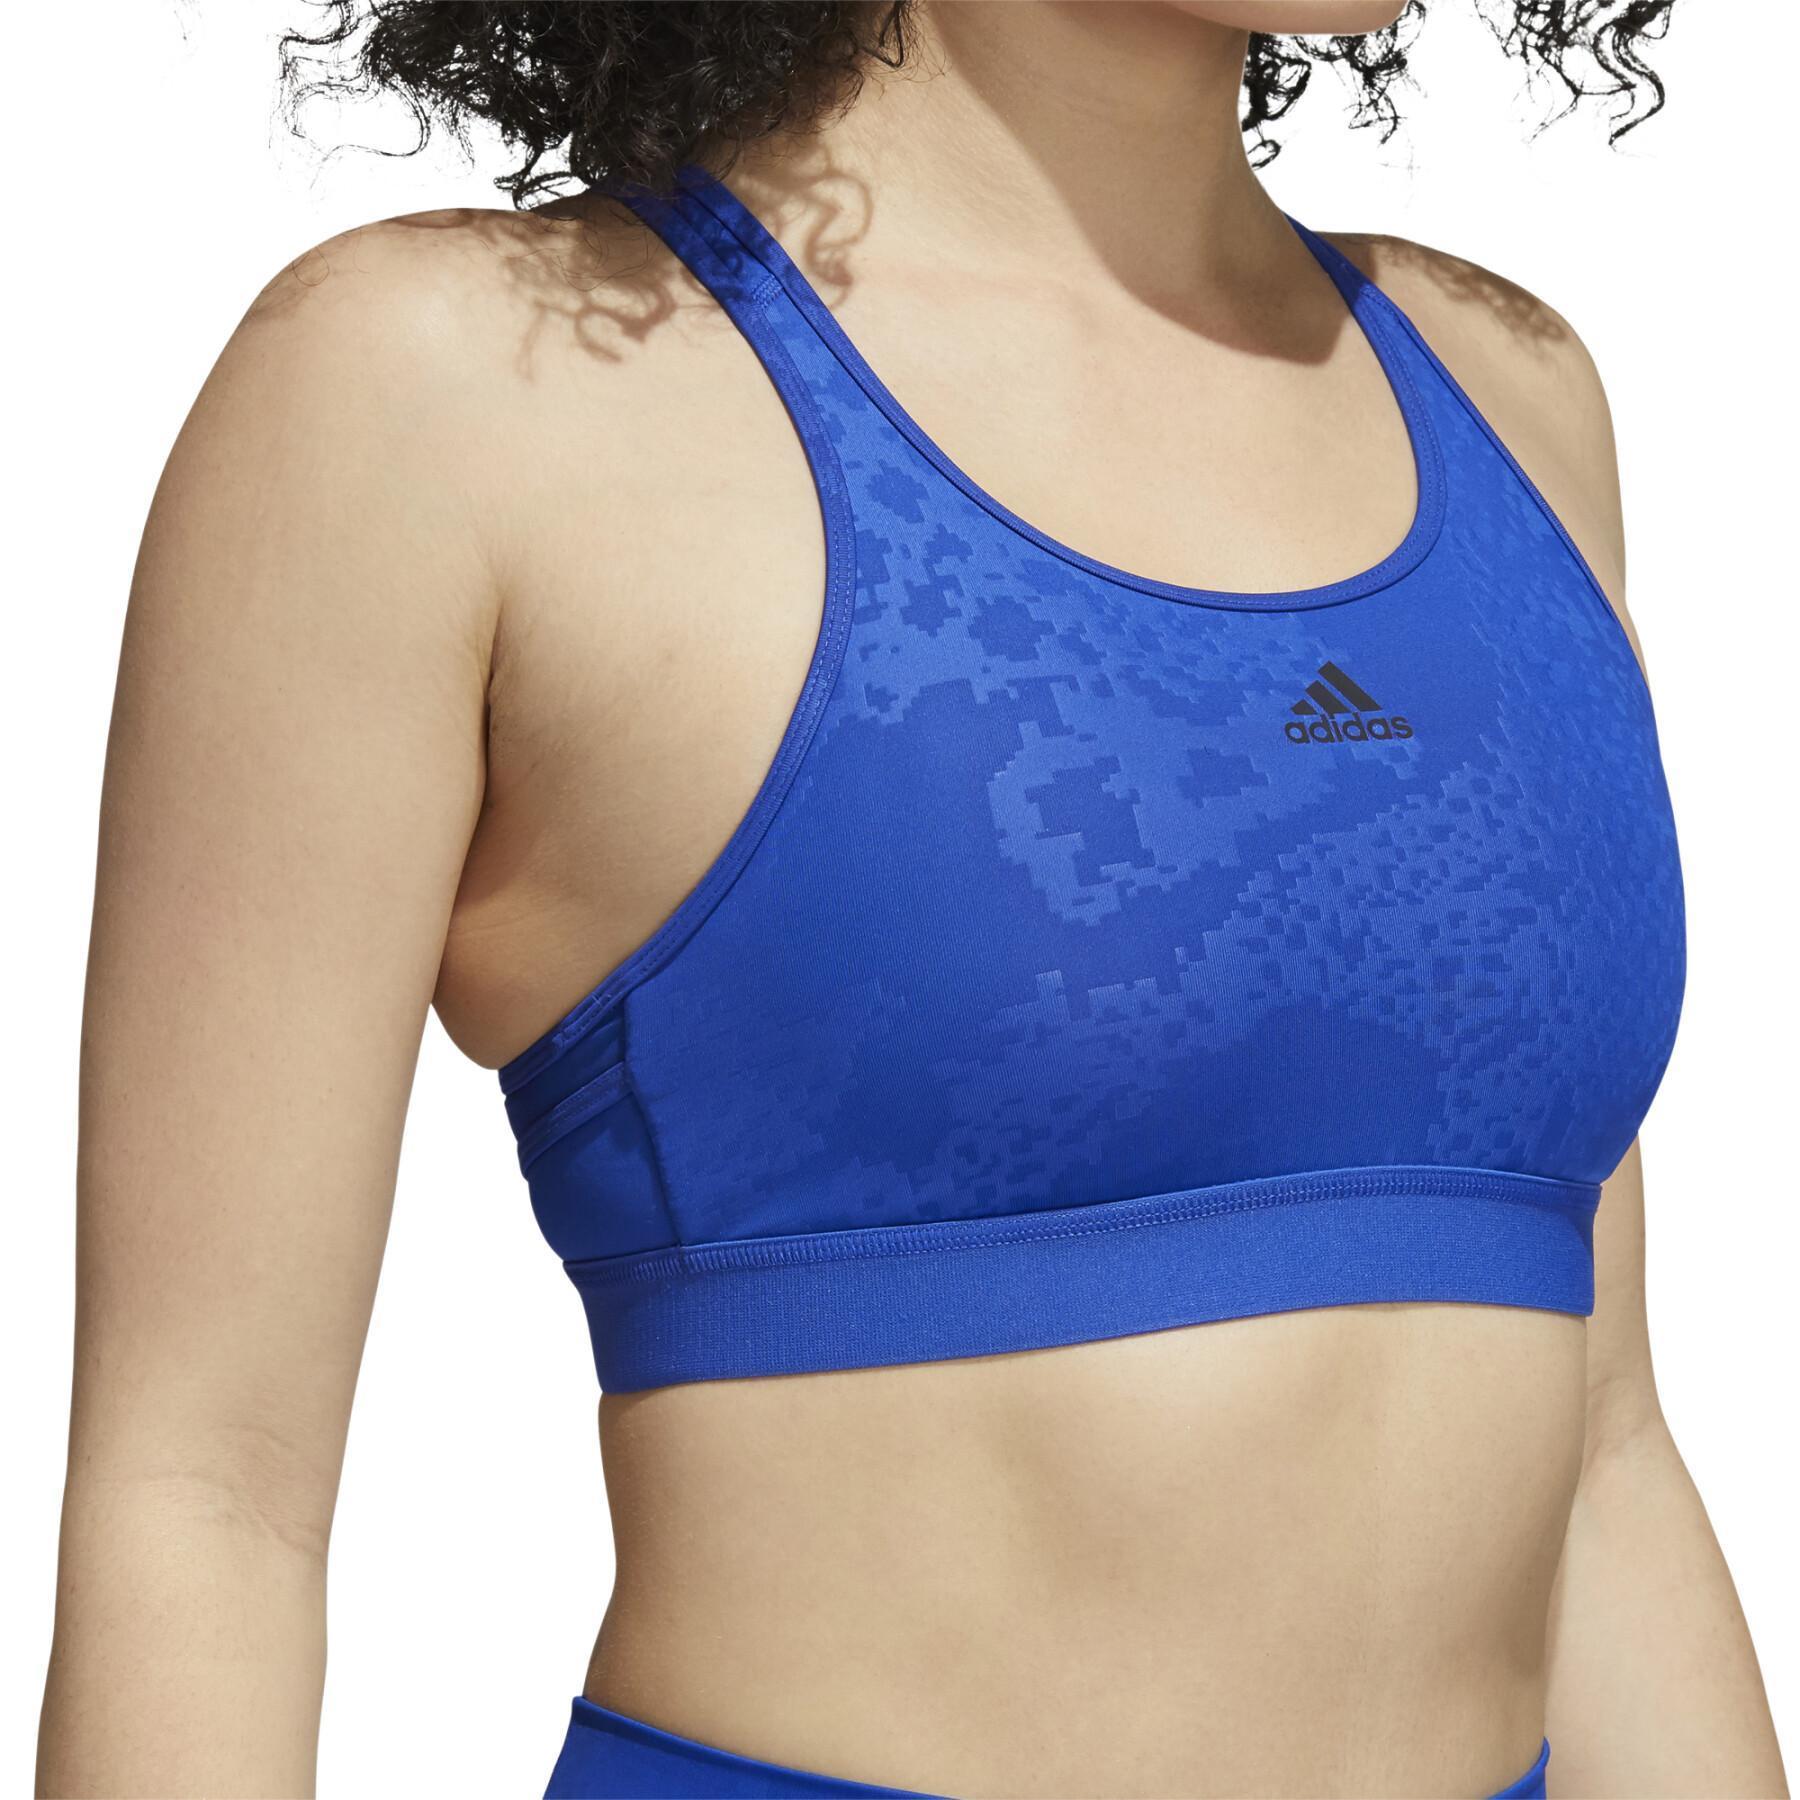 Brassière femme adidas Believe This Medium-Support Lace Camo Workout